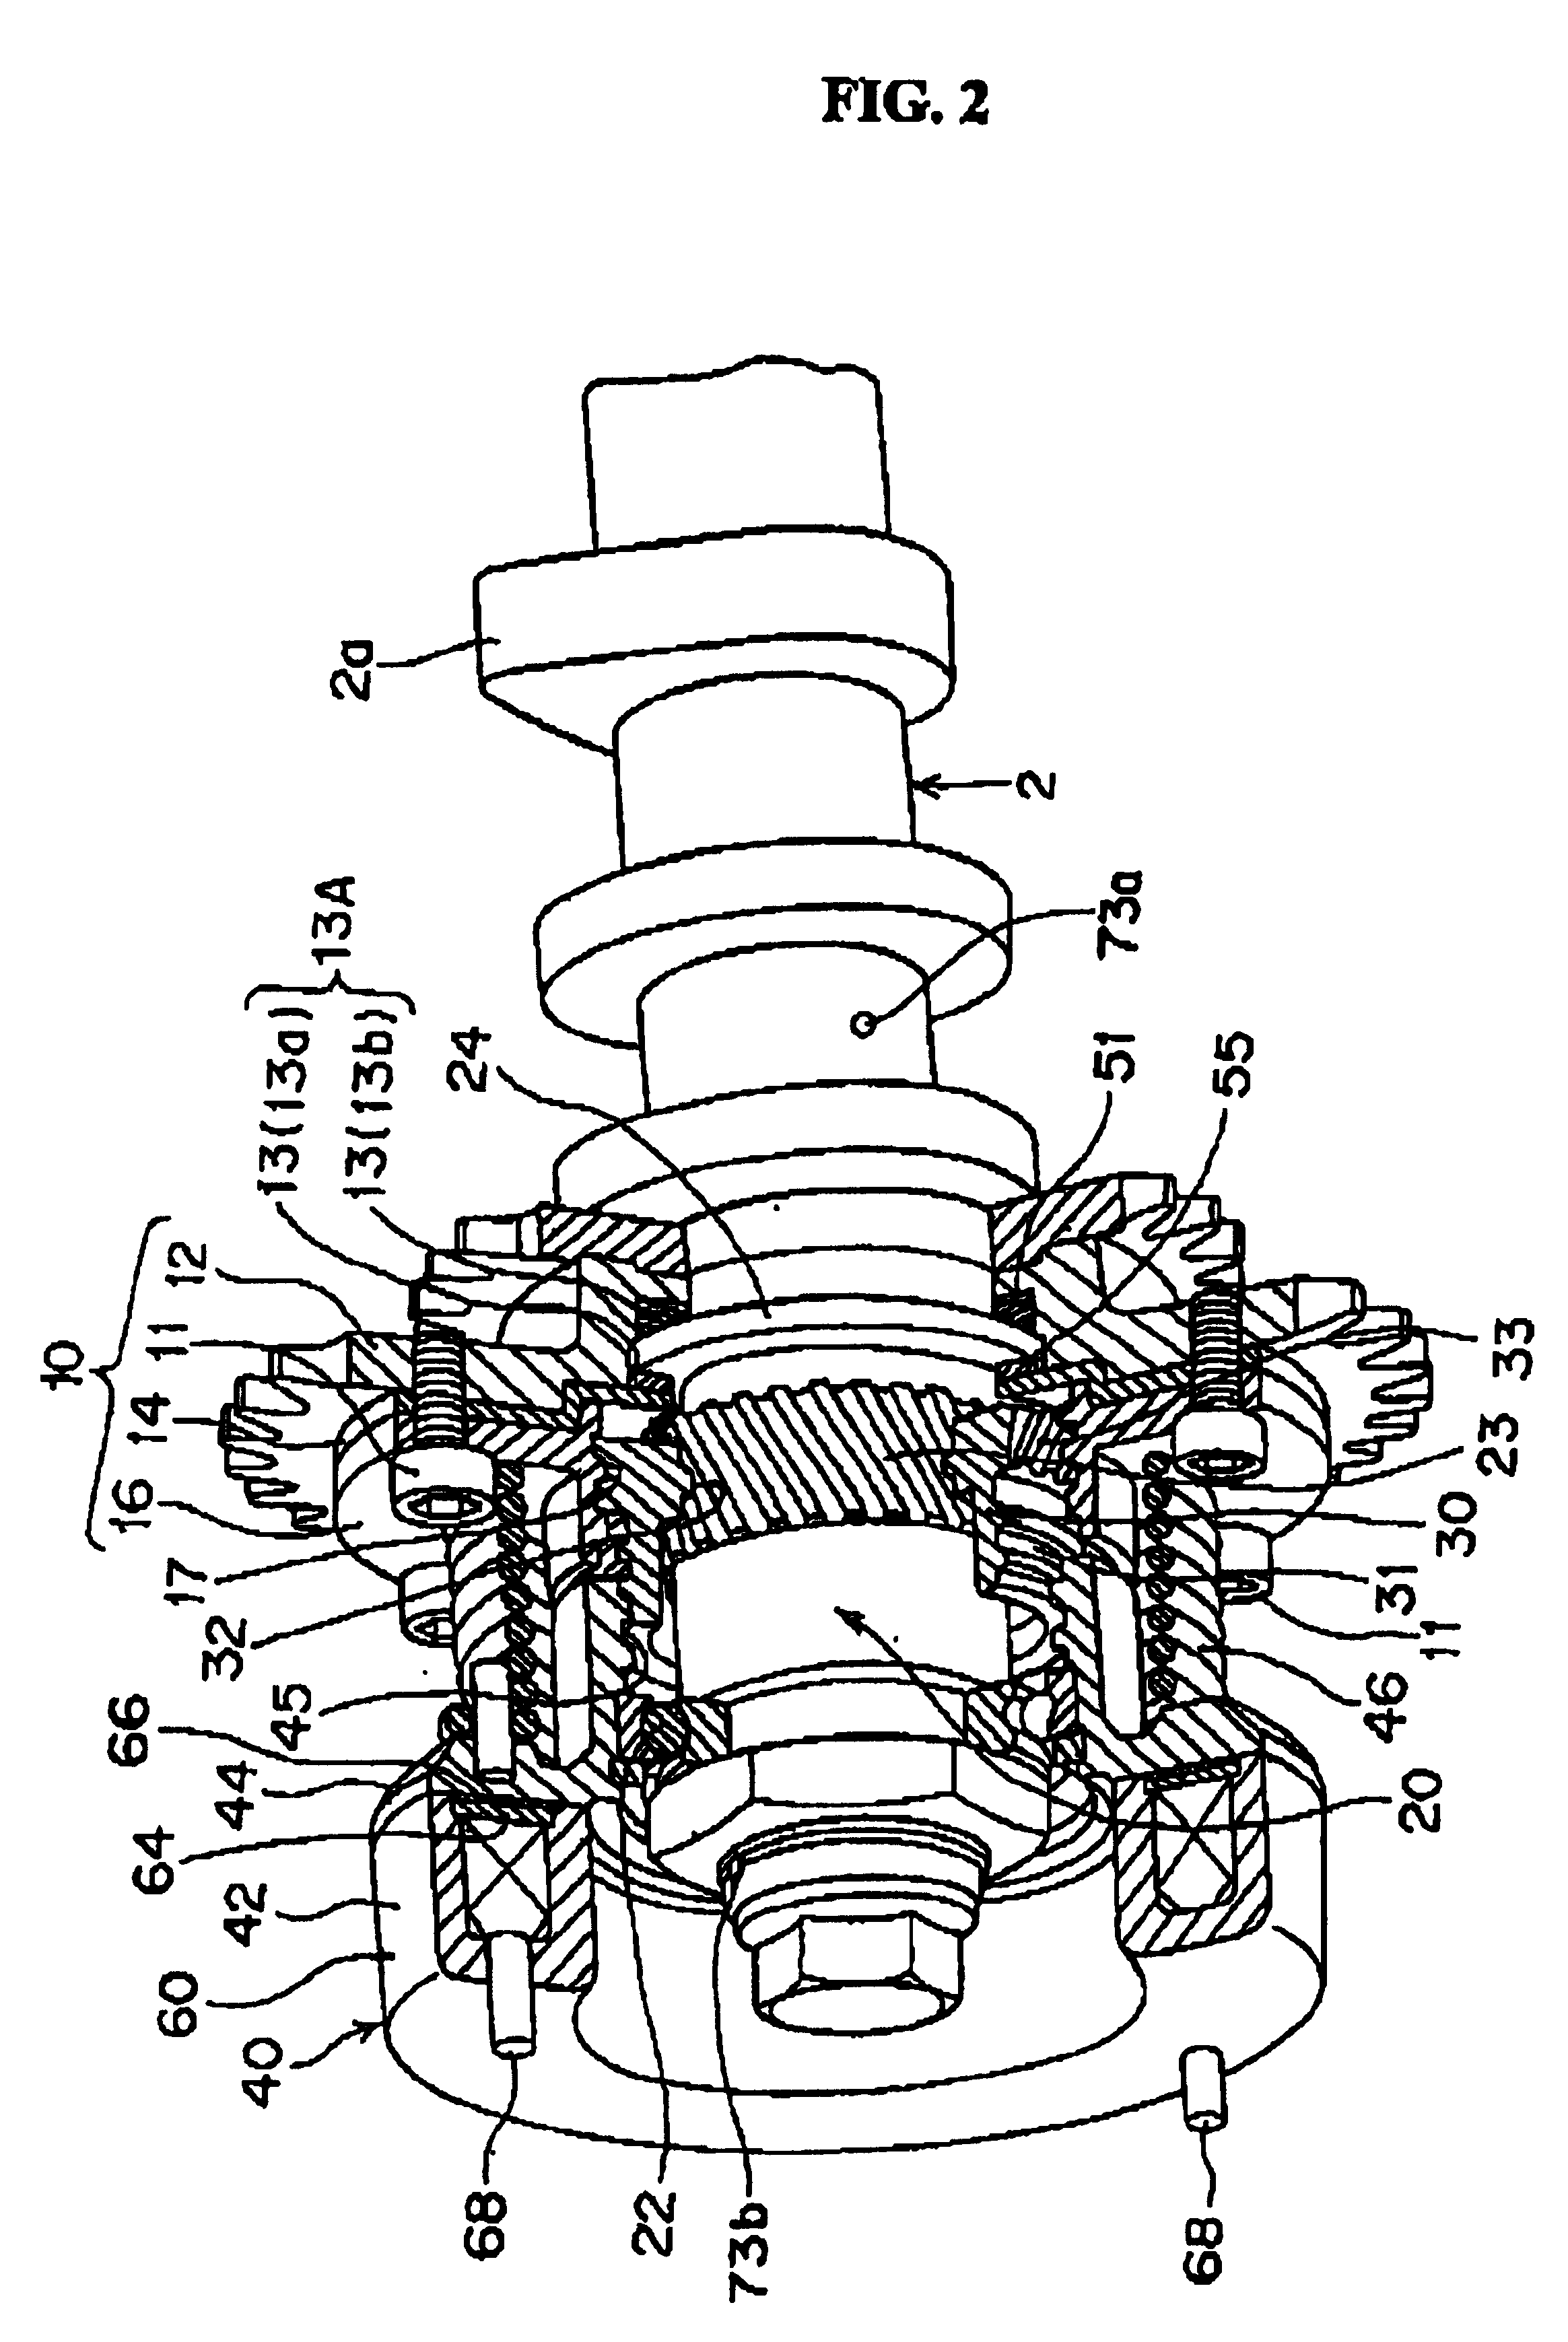 Electromagnetic brake cooling structure of phase variable device in car engine